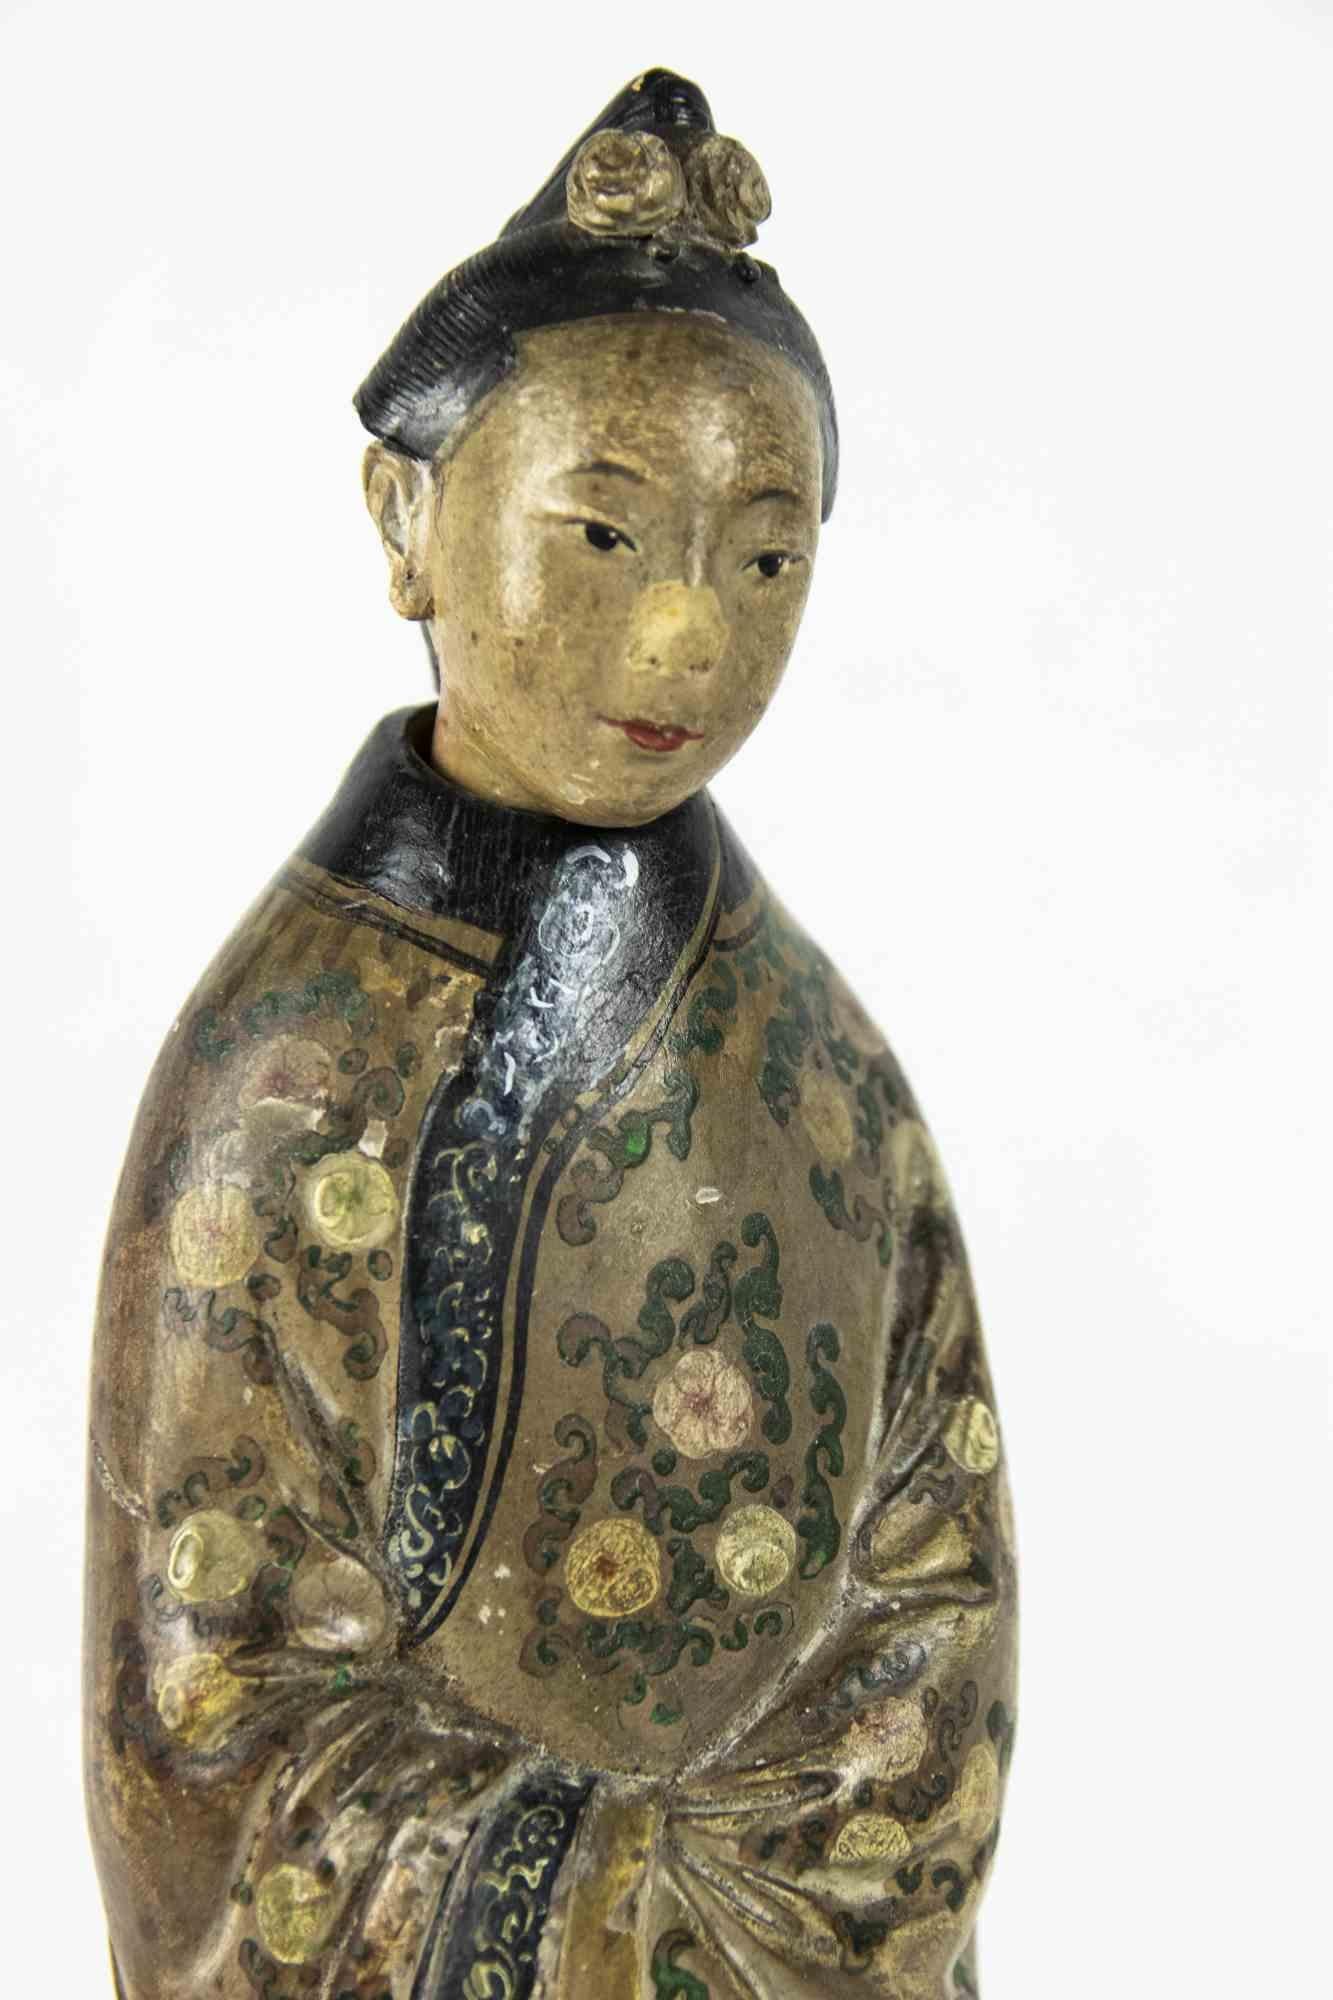 Chinese Statuette is an original set of decorative object realized in the early 20th century.

Original colored terracotta. 

The small sculpture depicts a female chinese figures. The head is movable and she wears an elaborated traditional